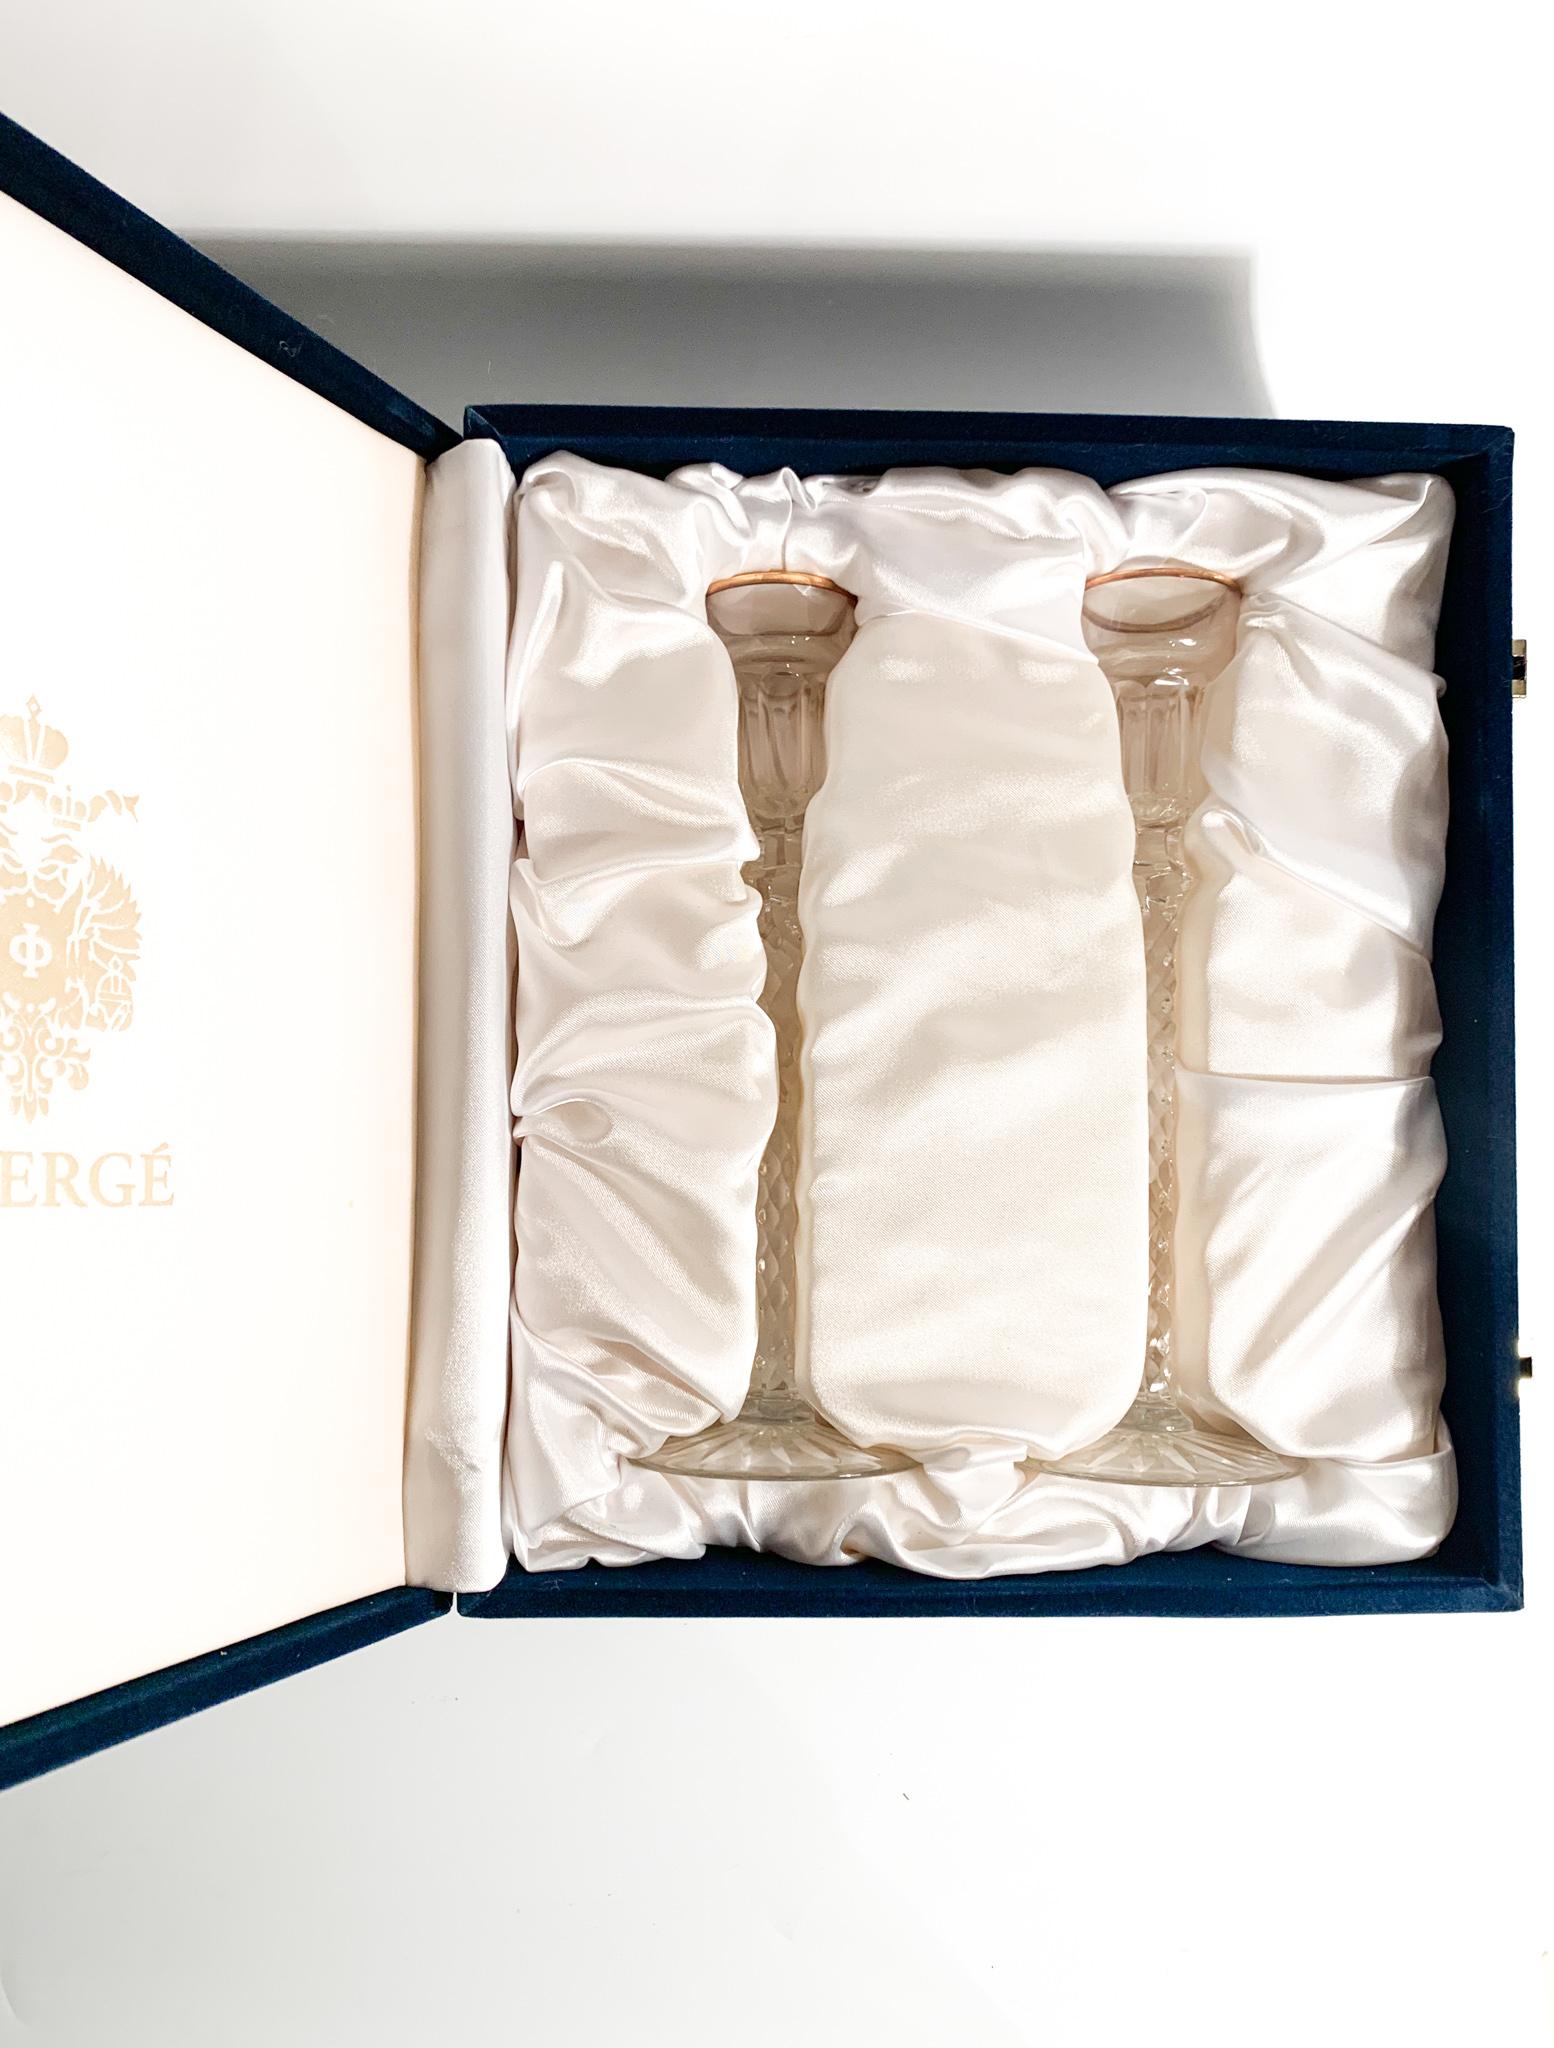 Empire Pair of Fabergè Imperial Crystal Candlesticks Michael Palace 1940s